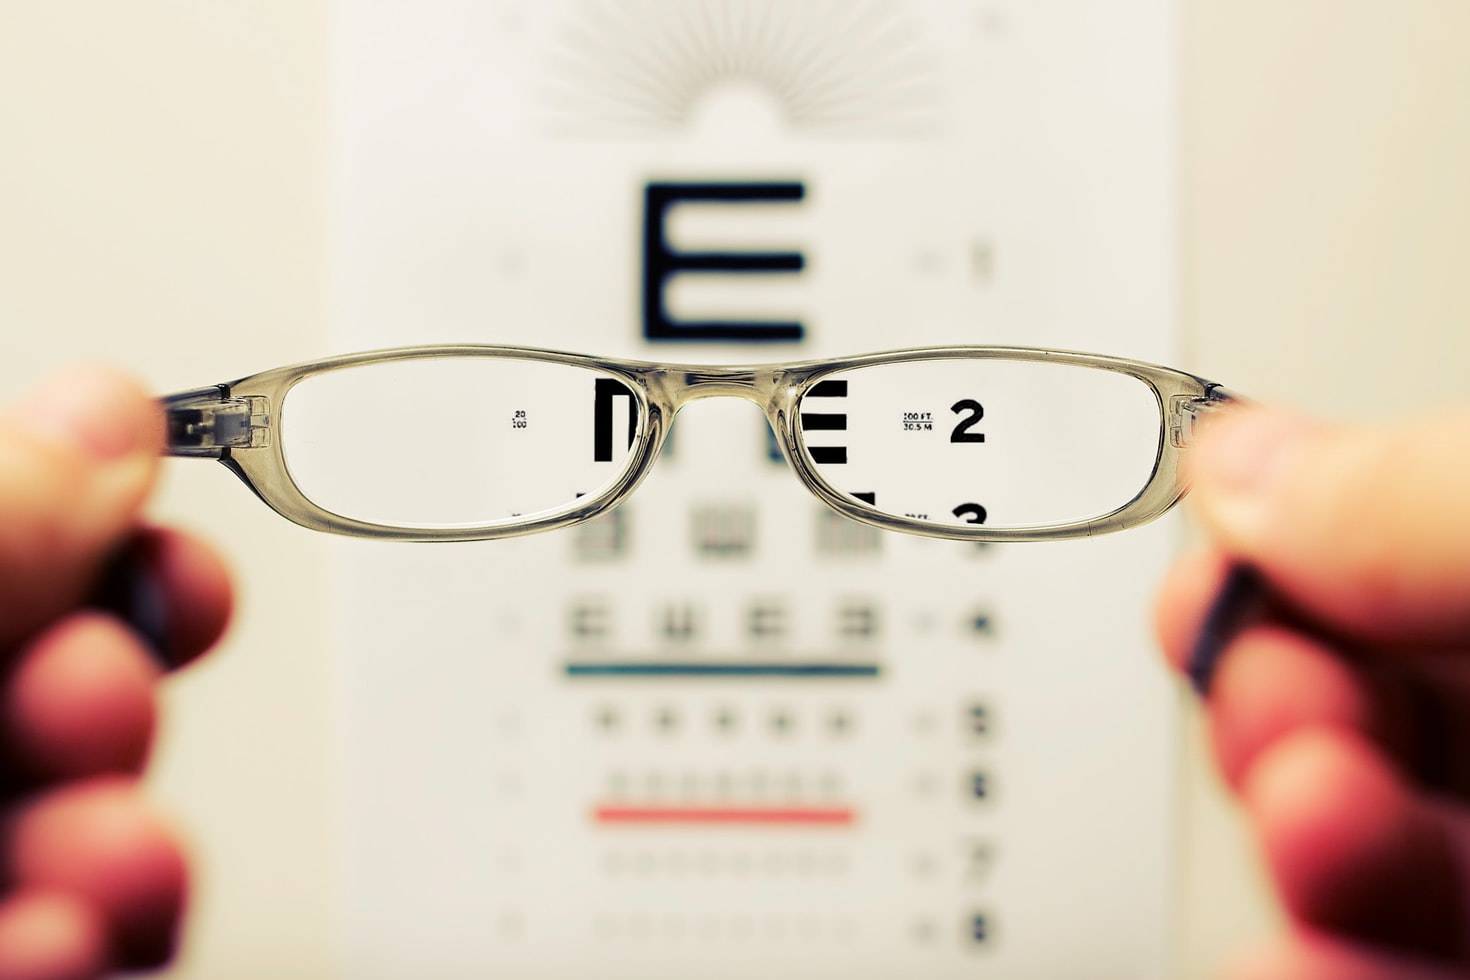 Top 5 Tips to Improve and Maintain Good Eyesight